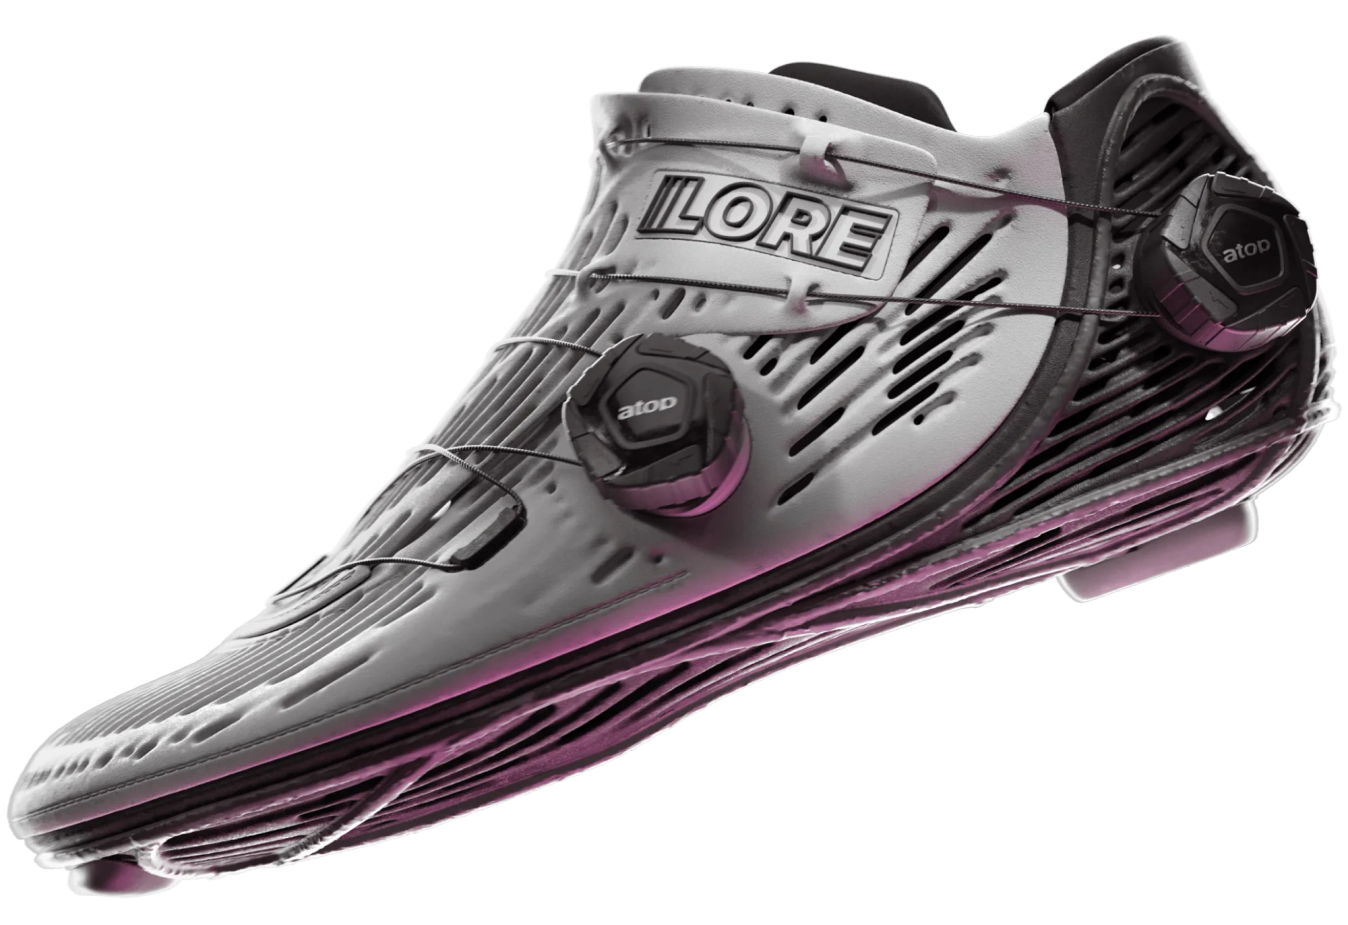 The latest shoe offers more performance, according to Lore Cycle 